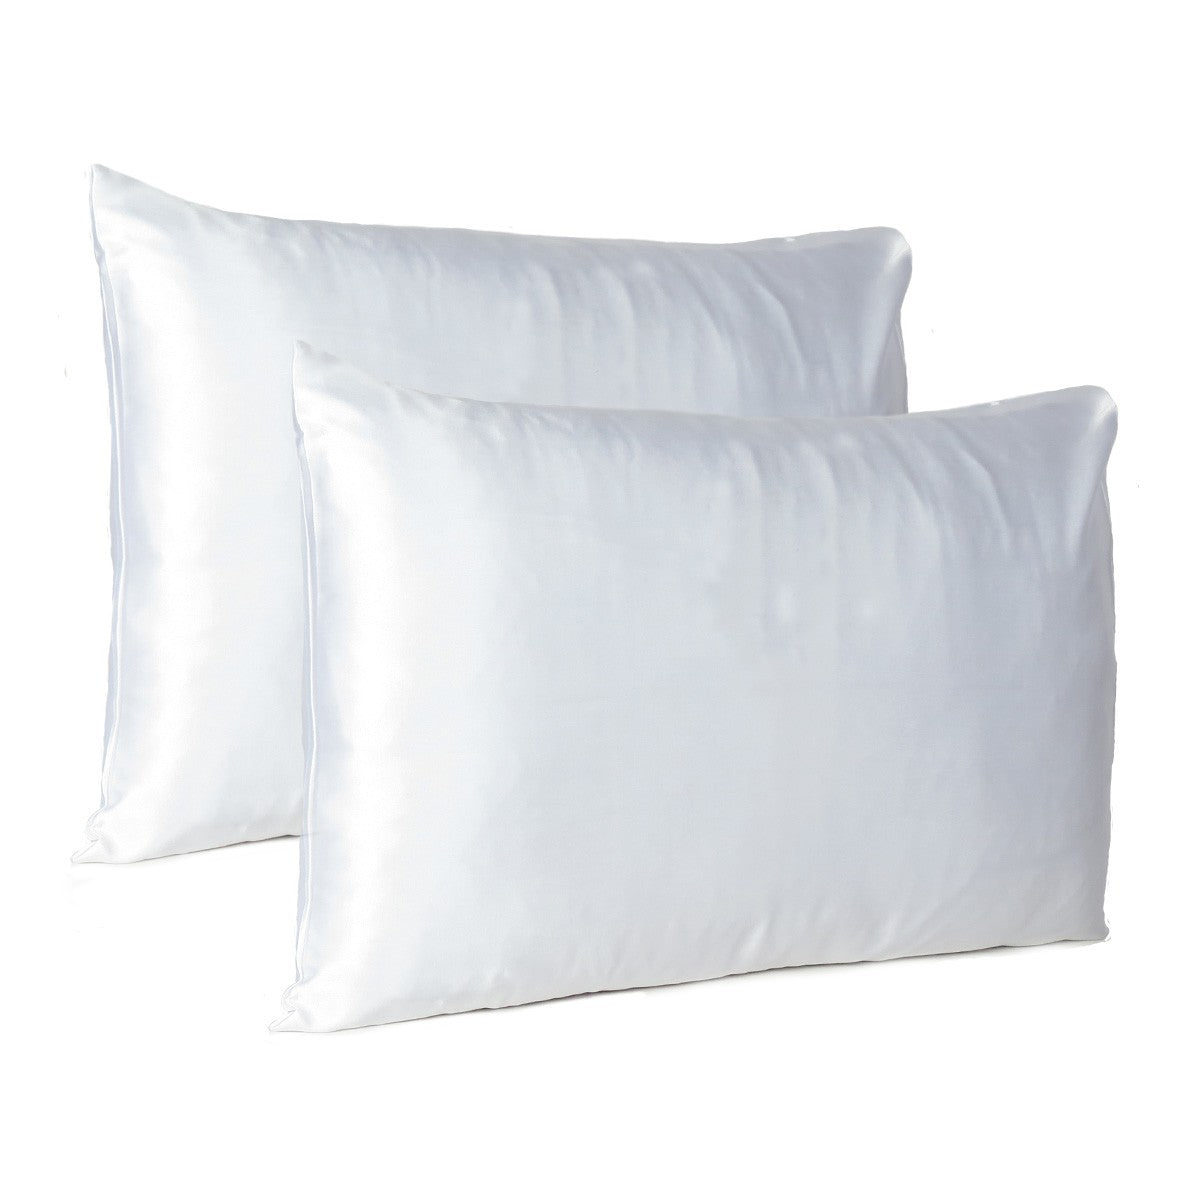 White-Dreamy-Set-Of-2-Silky-Satin-Queen-Pillowcases-Bed-Sheets